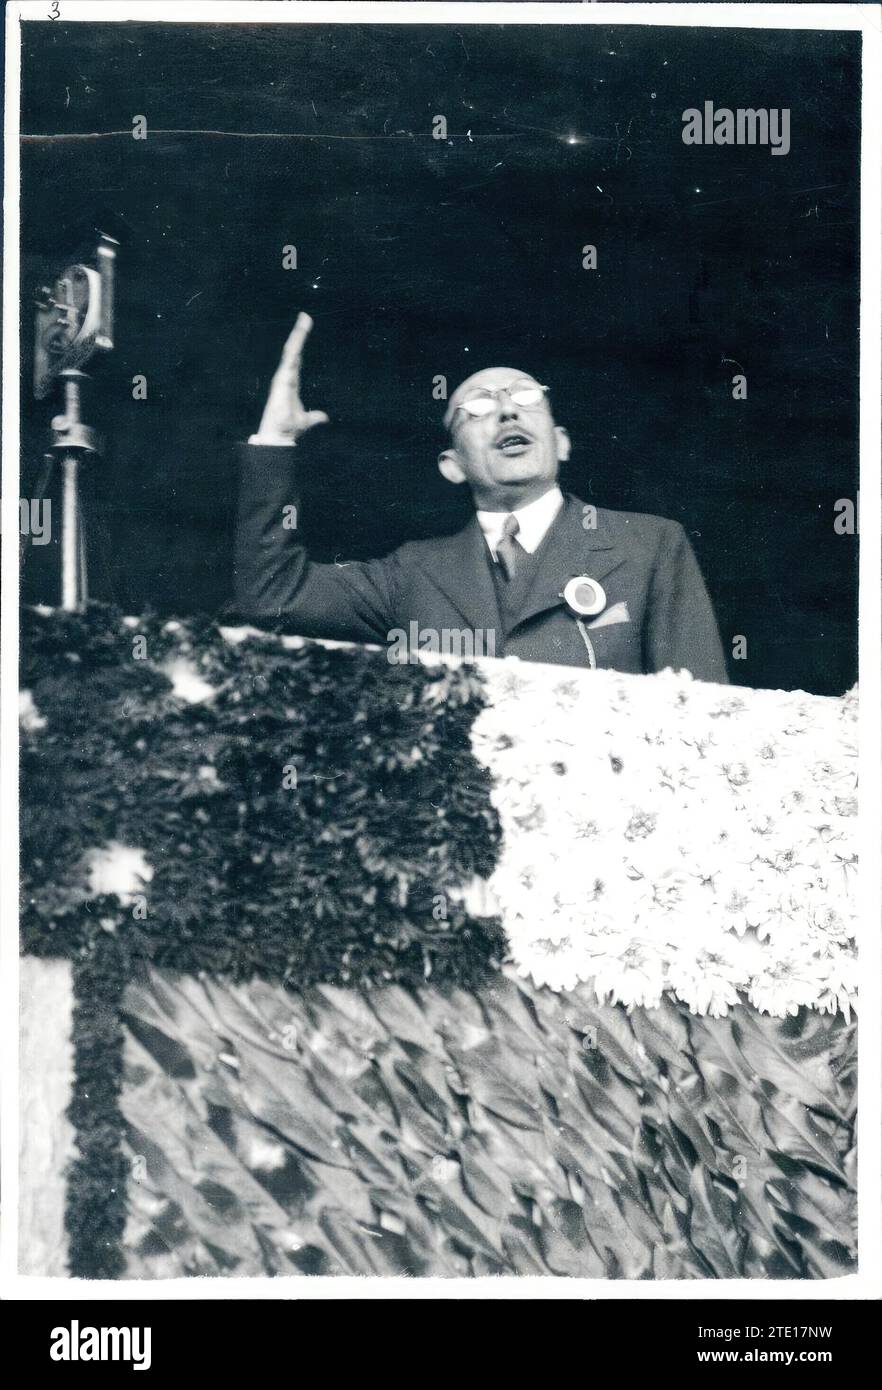 12/31/1934. Ricardo Samper Giving his speech during a rally organized by the radical party in the Mestalla field, Valencia. Masip barber house photo. Credit: Album / Archivo ABC / Vicente Barbera Masip Stock Photo